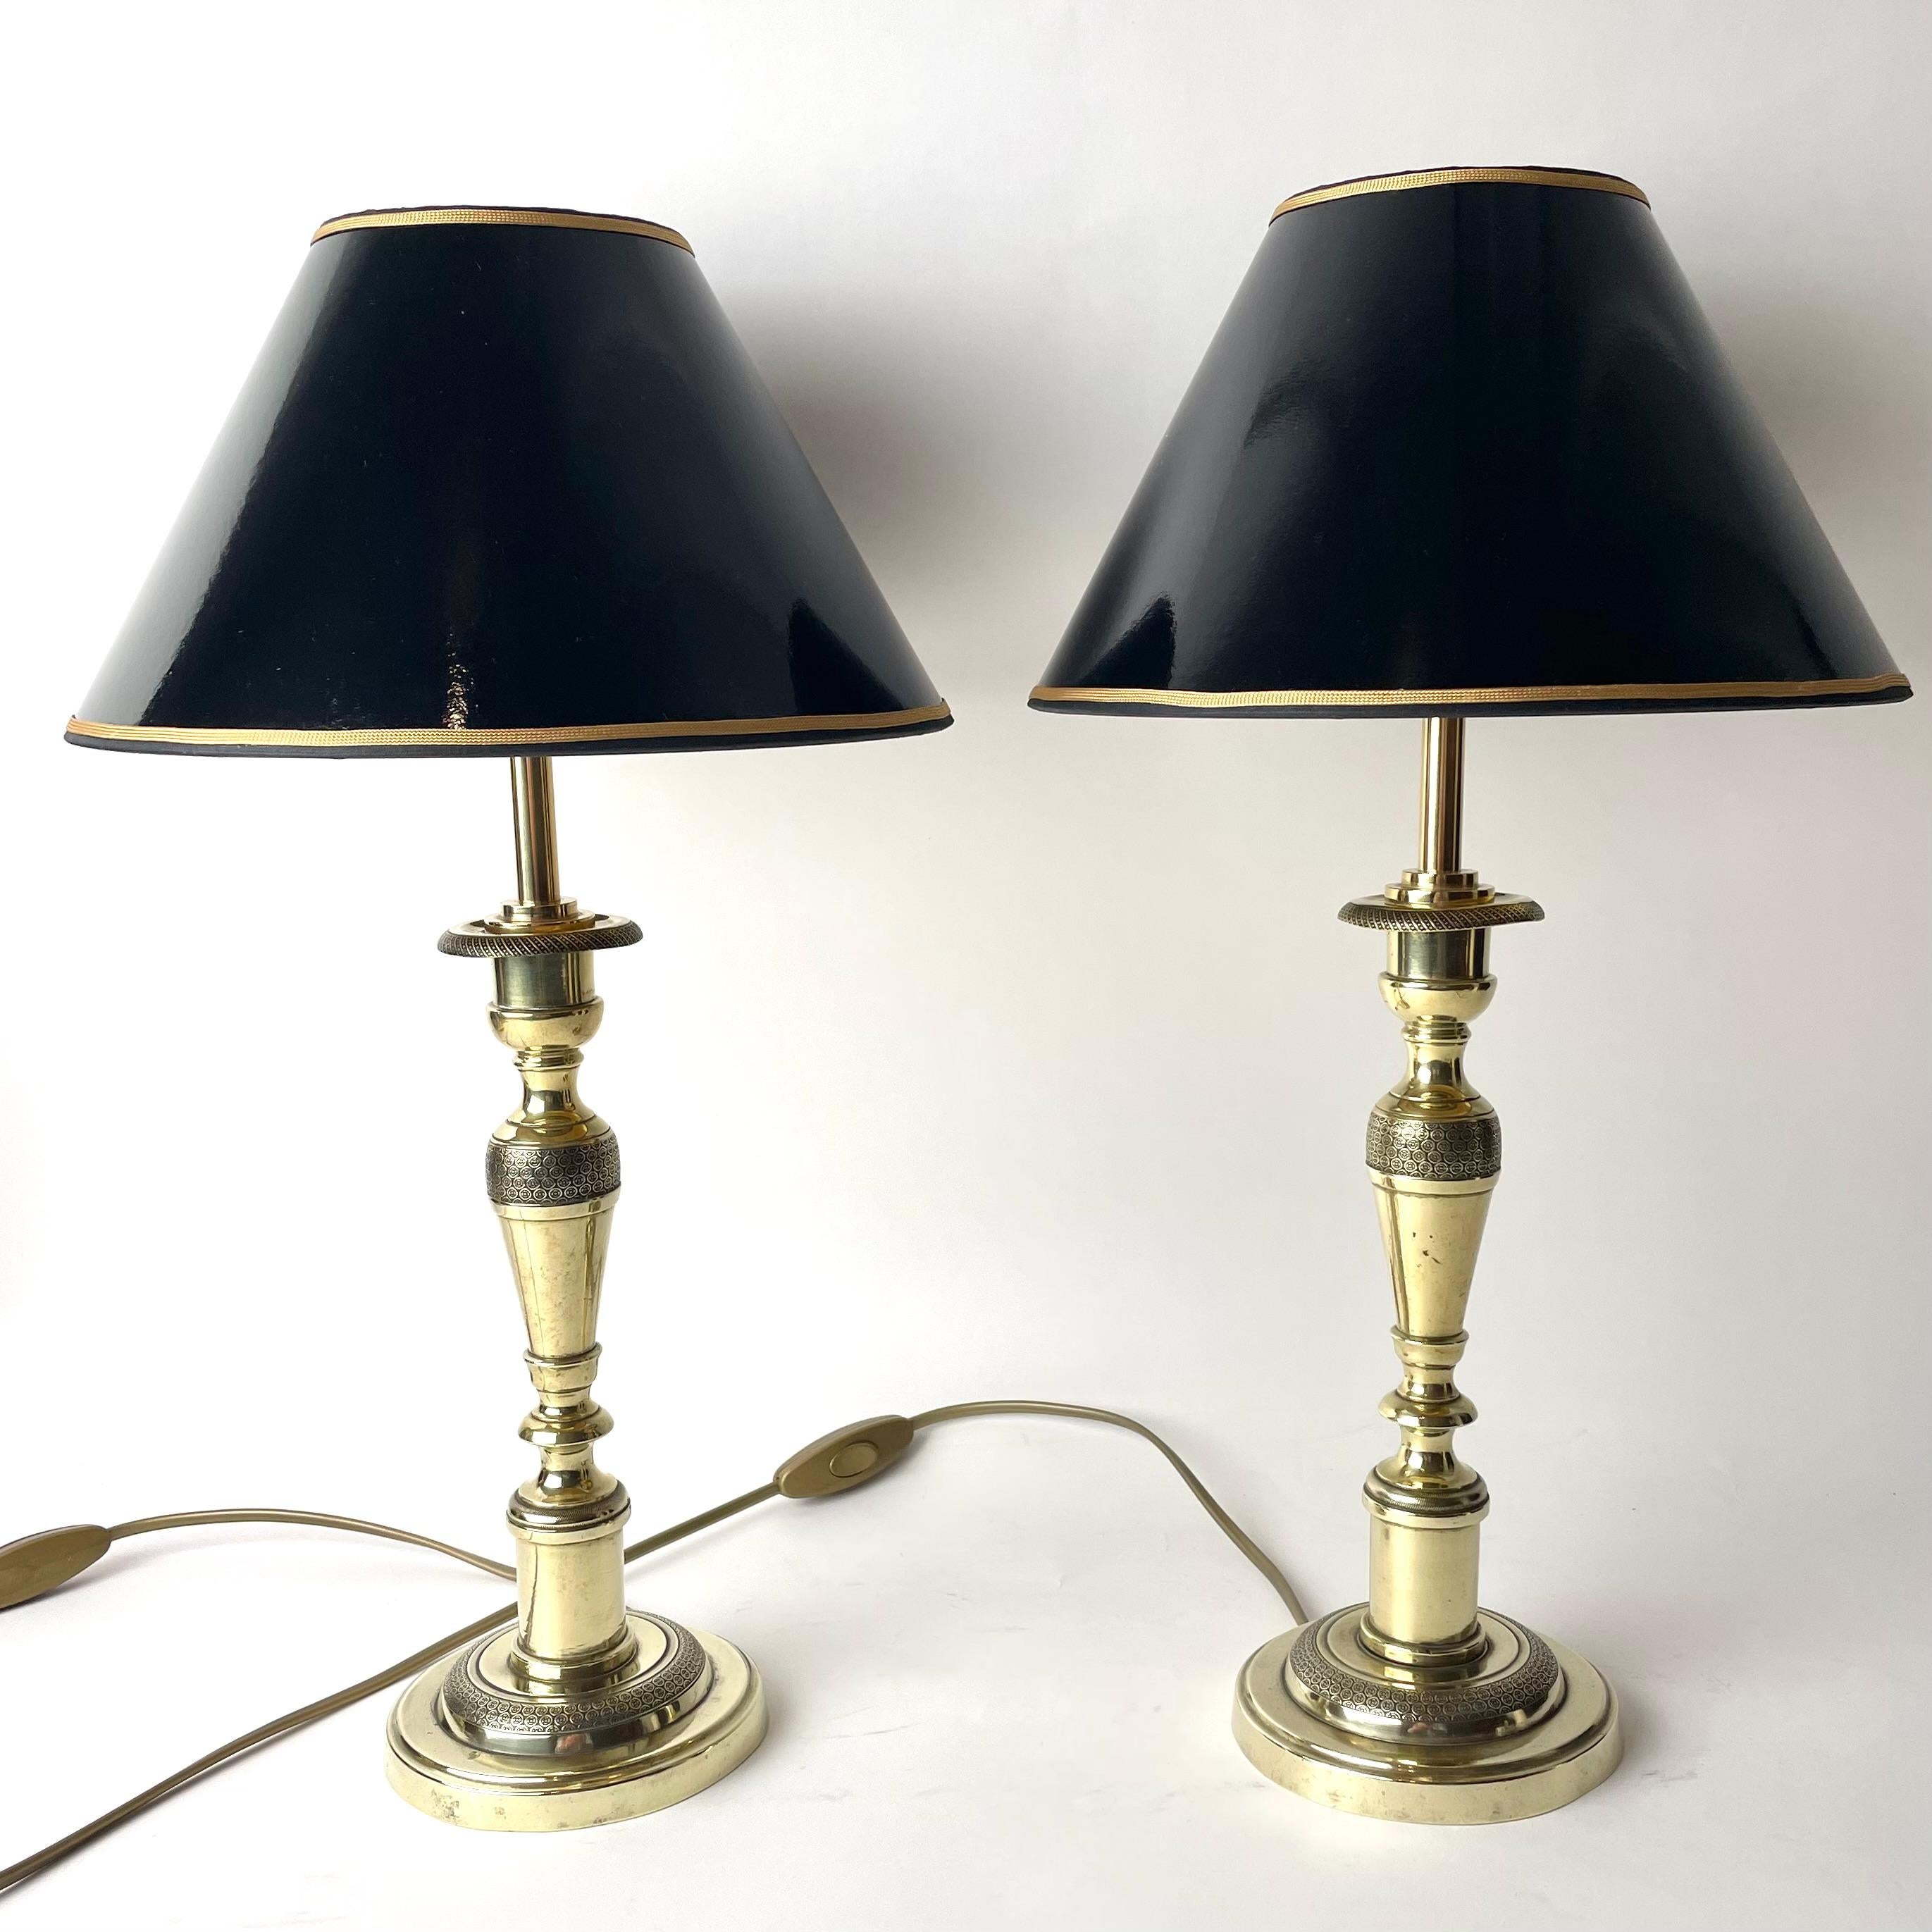 French Pair of Elegant Empire Table Lamps in Brass, Early 19th Century